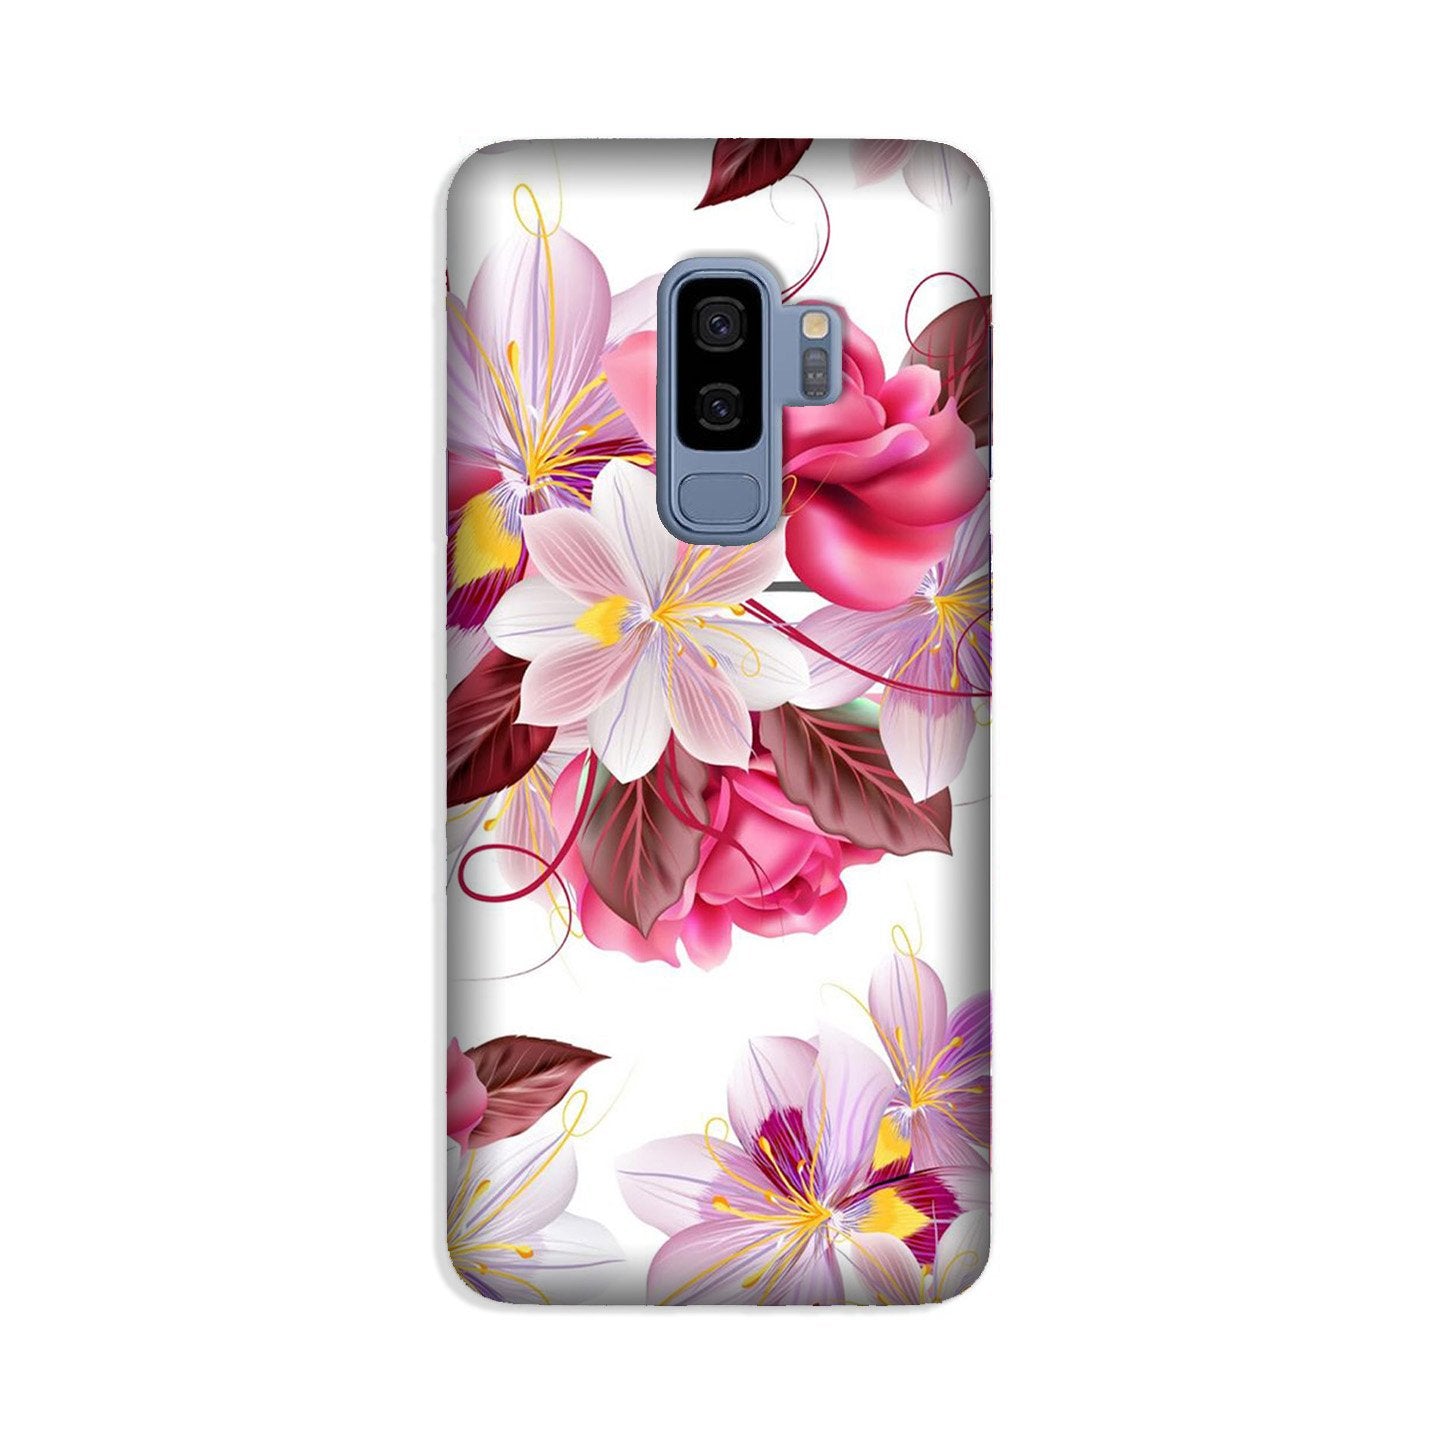 Beautiful flowers Case for Galaxy S9 Plus